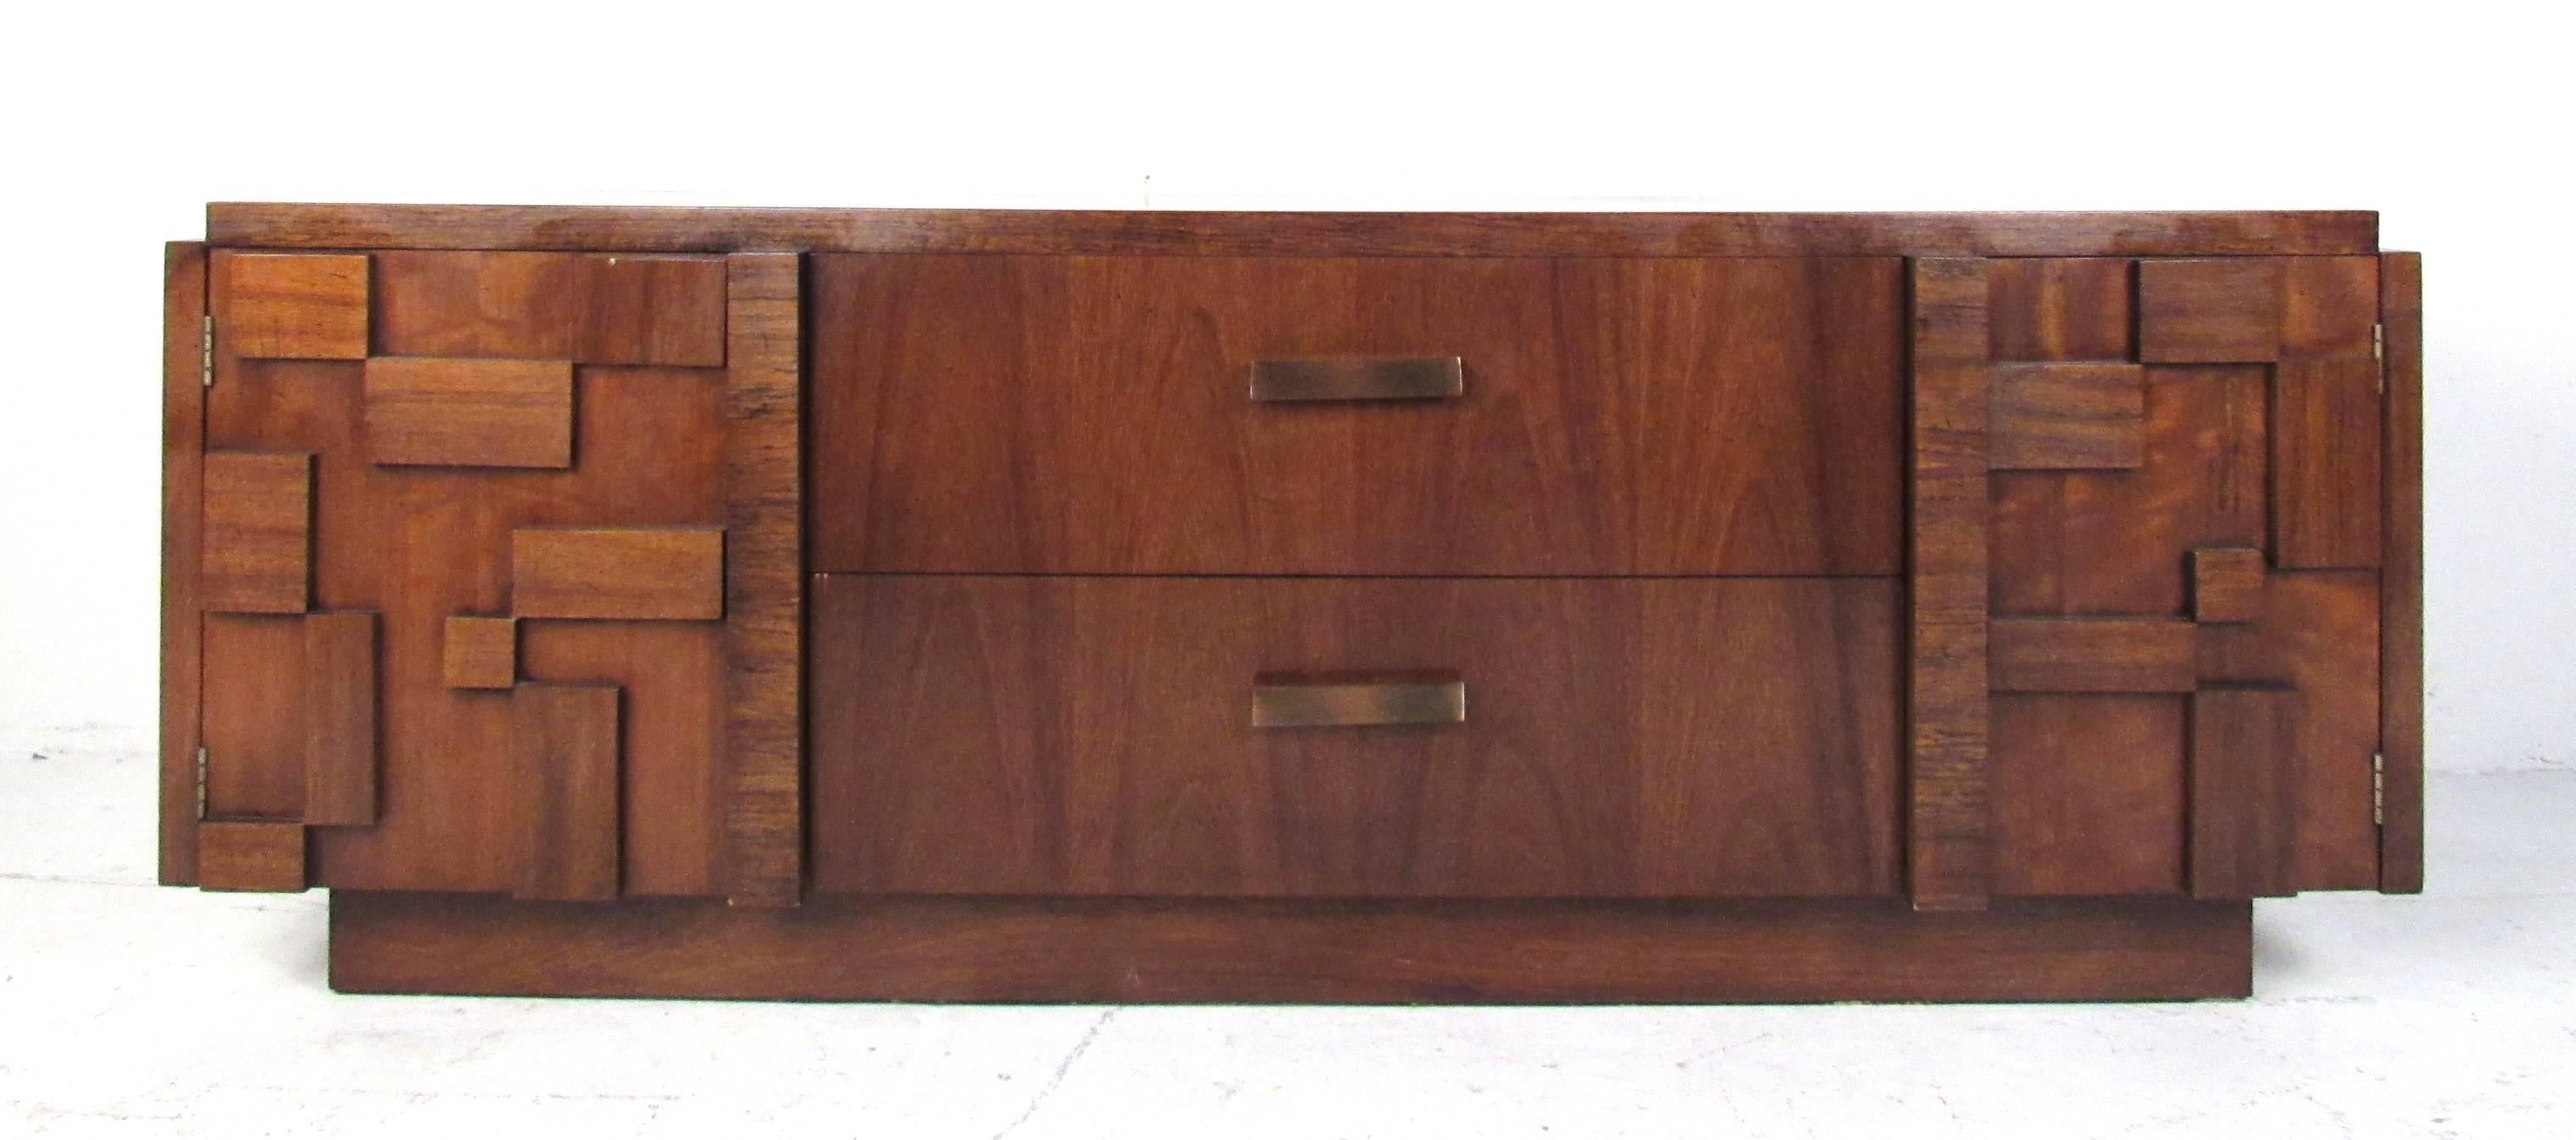 This gorgeous vintage modern credenza offers plenty of room for storage within its two hefty drawers and two large compartments with shelves. Quality construction with brutalist cabinet door fronts and sculpted drawer handles. This midcentury case